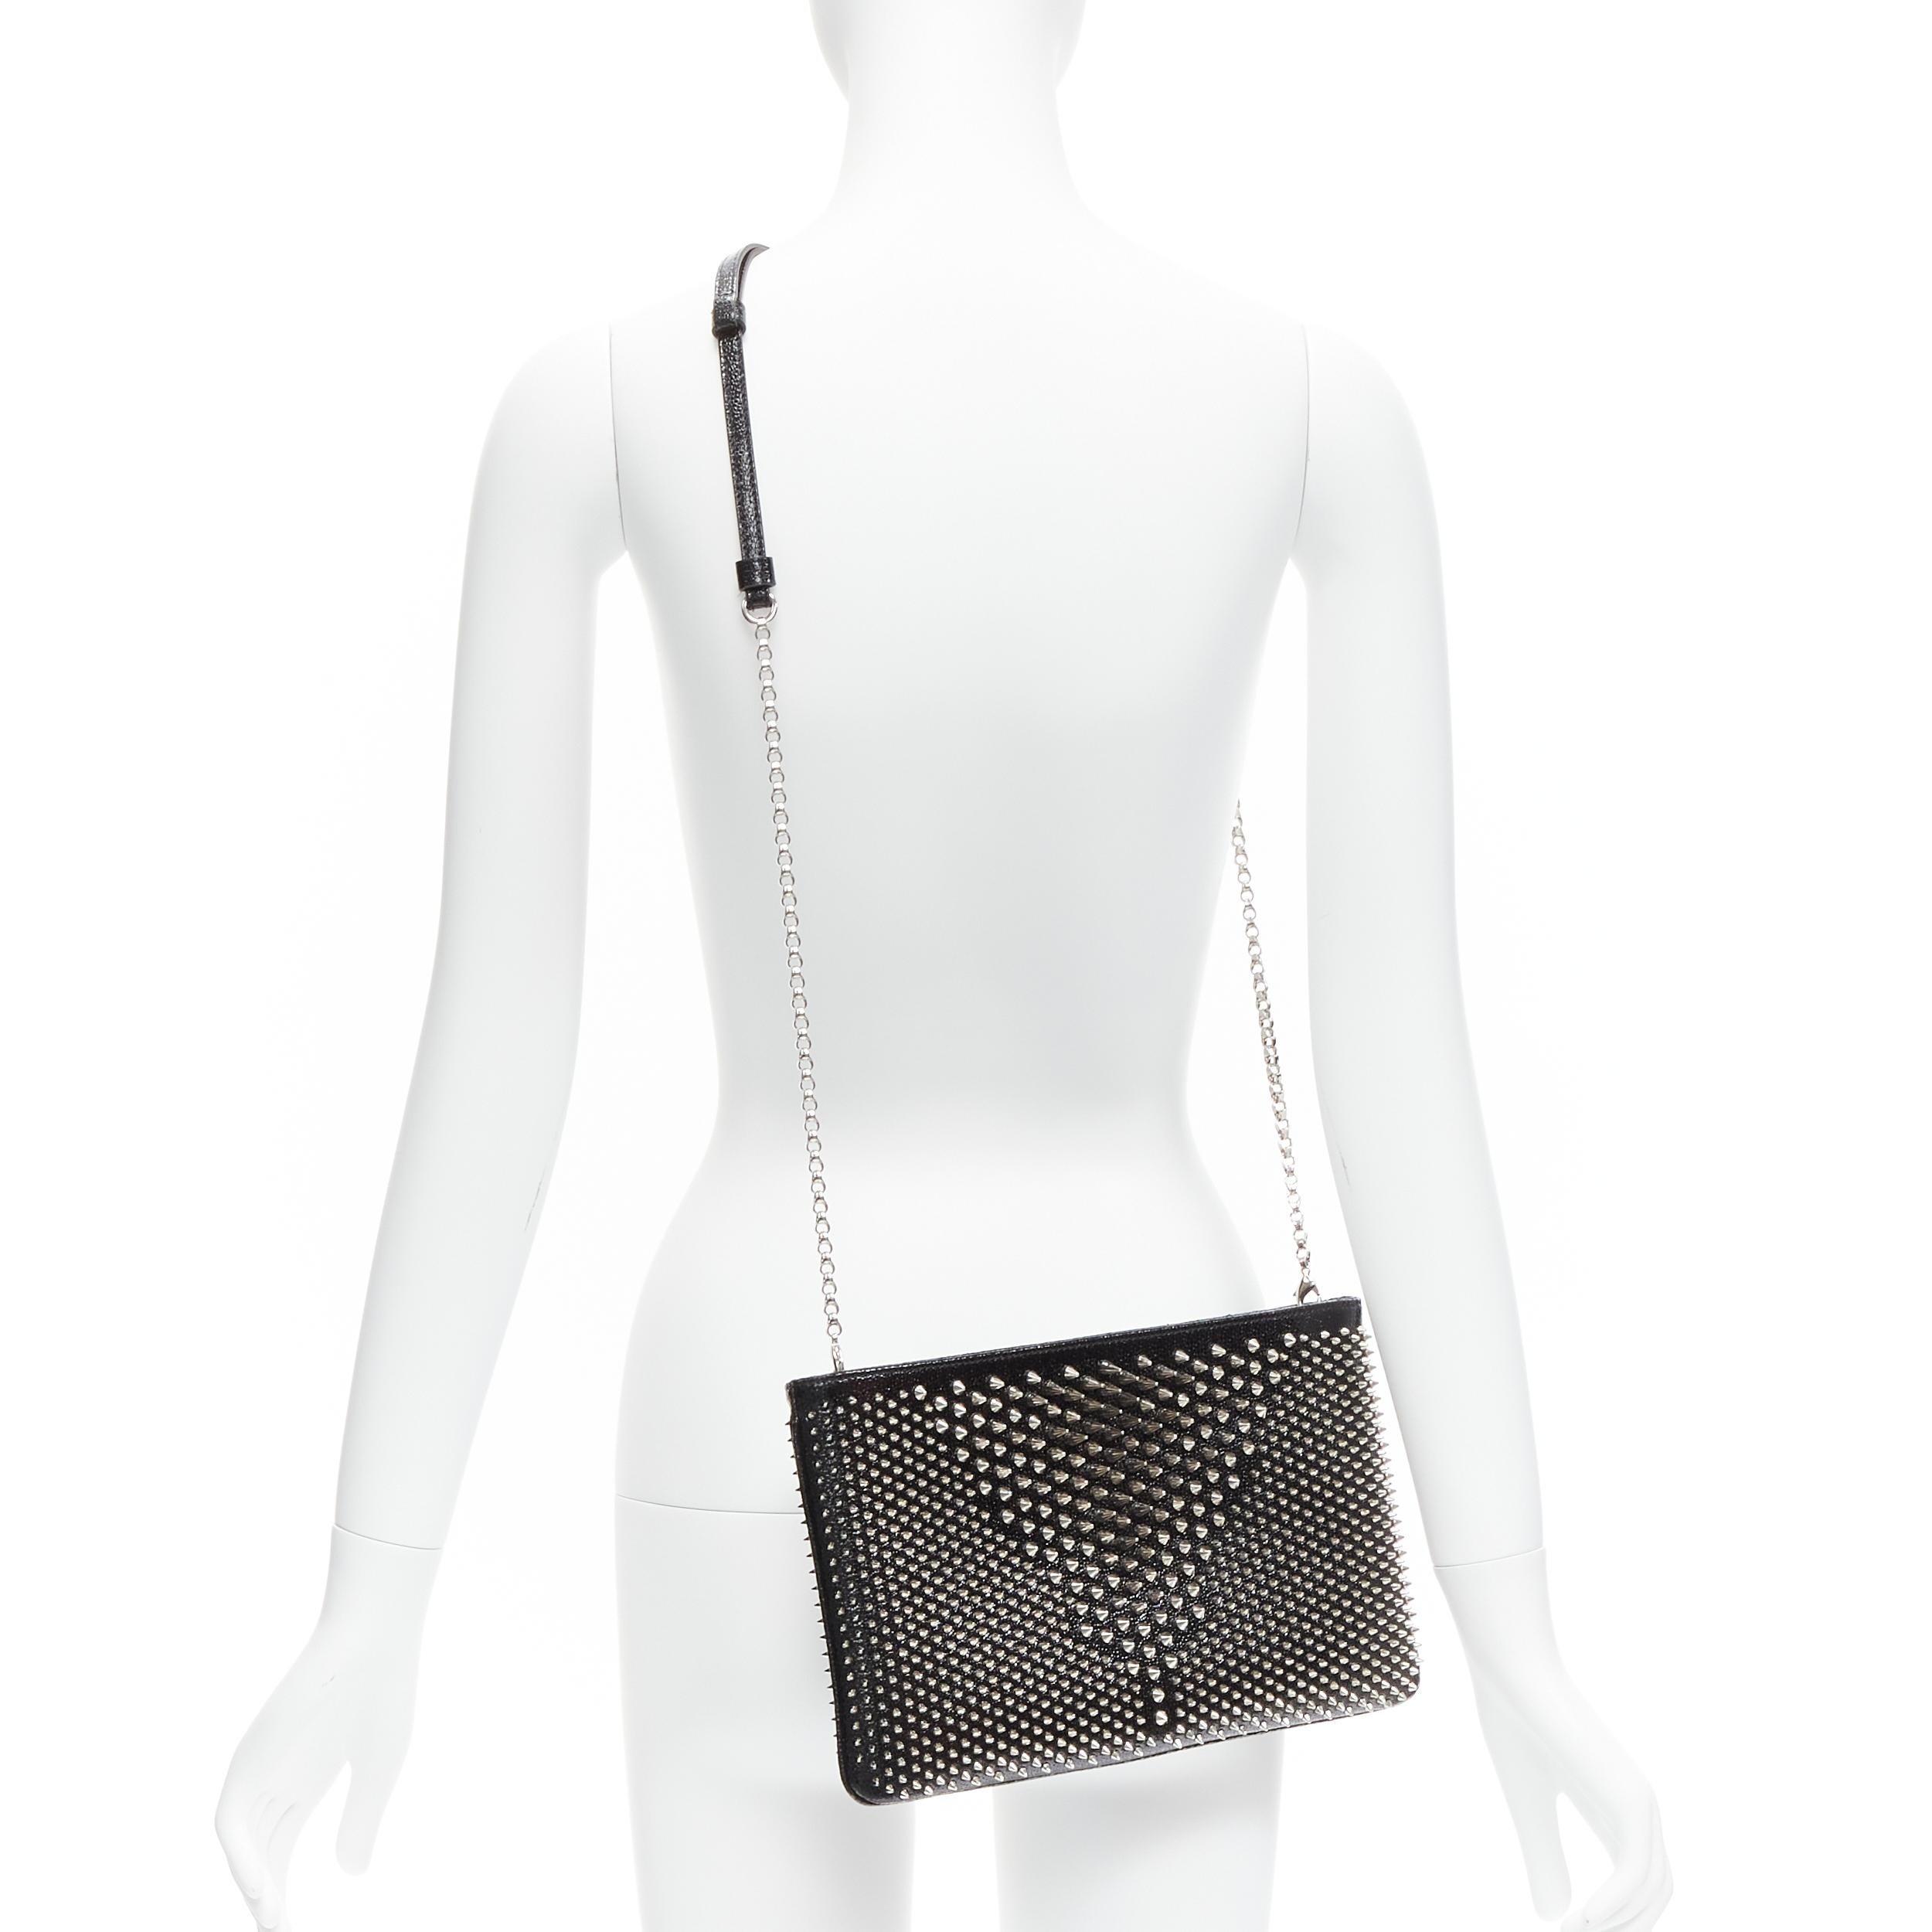 new CHRISTIAN LOUBOUTIN Loubiposh black spike stud leather crossbody shoulder clutch bag
Reference: TGAS/D00168
Brand: Christian Louboutin
Model: Loubiposh
Material: Leather, Metal
Color: Black, Silver
Pattern: Studded
Closure: Zip
Lining: Red